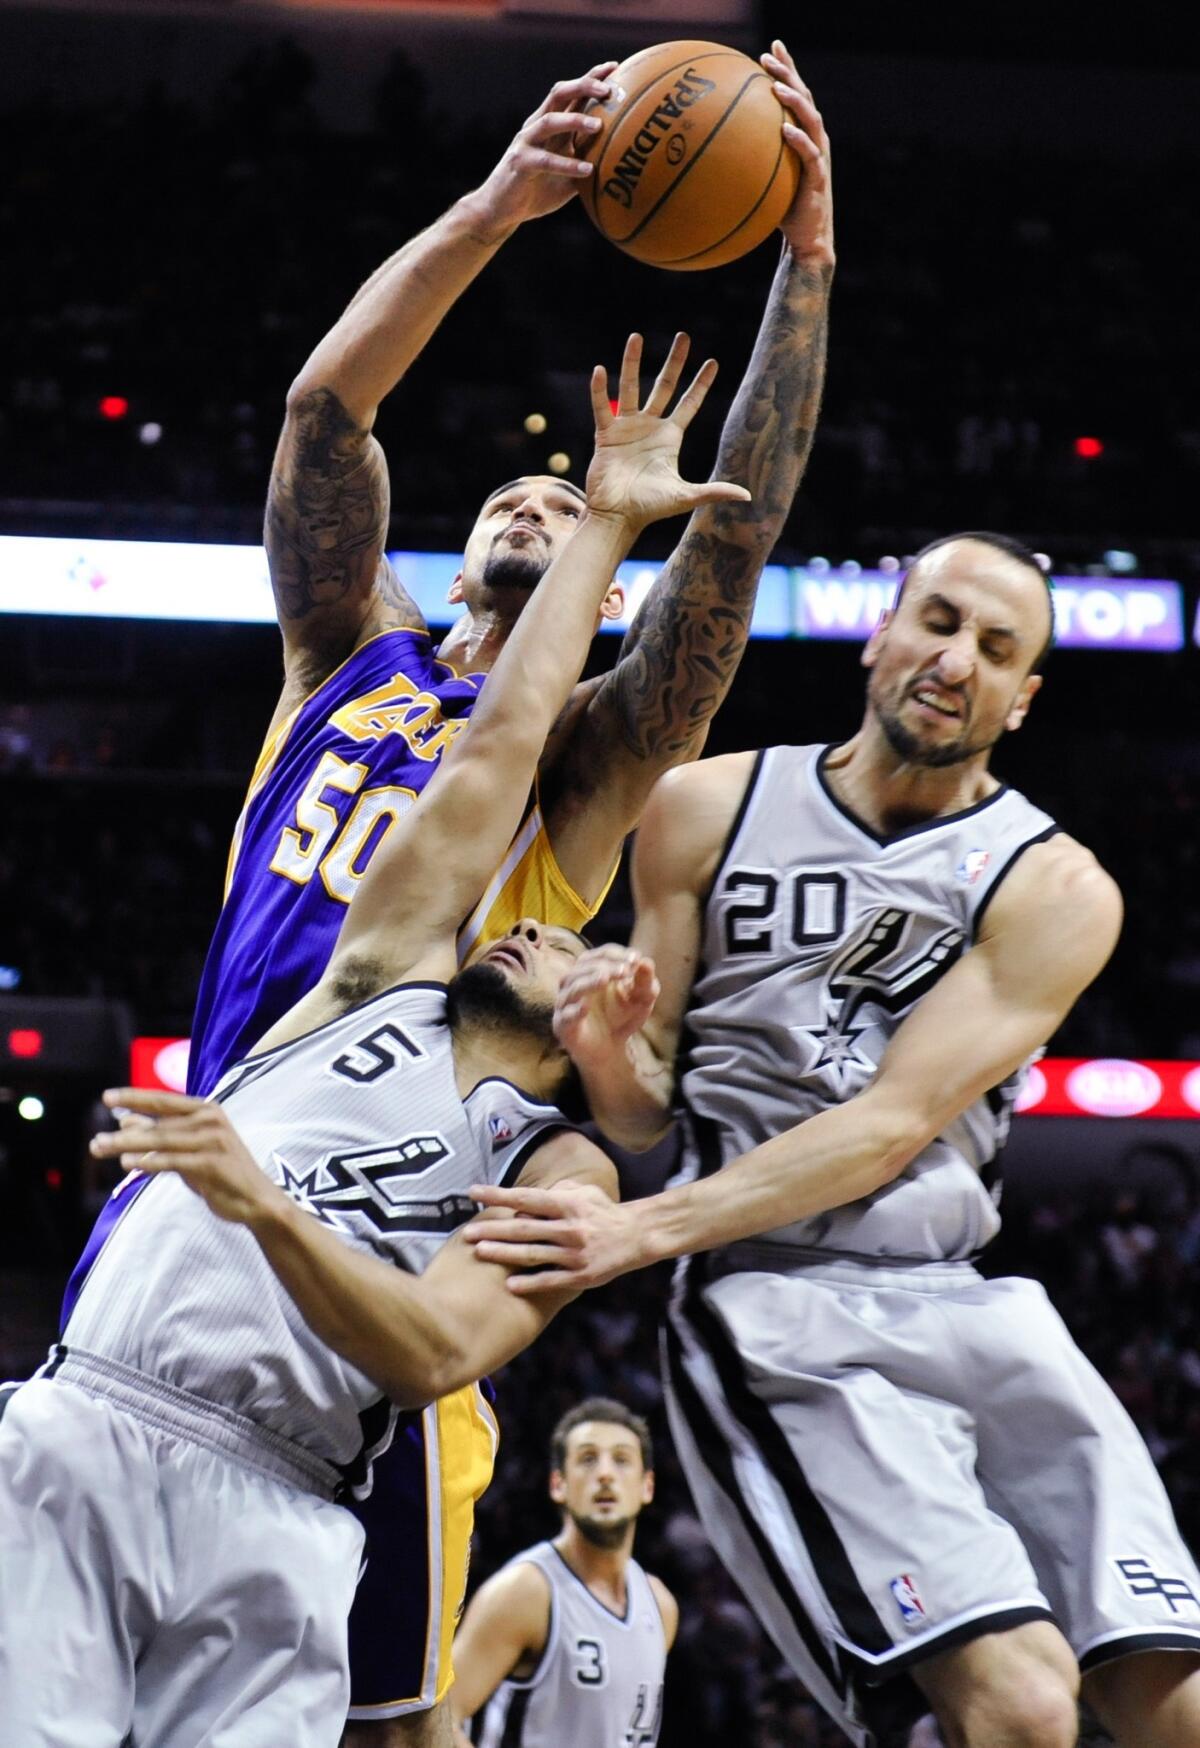 Lakers center Robert Sacre goes above Spurs guard Cory Joseph (5) and Manu Ginobili for a rebound in the second half.